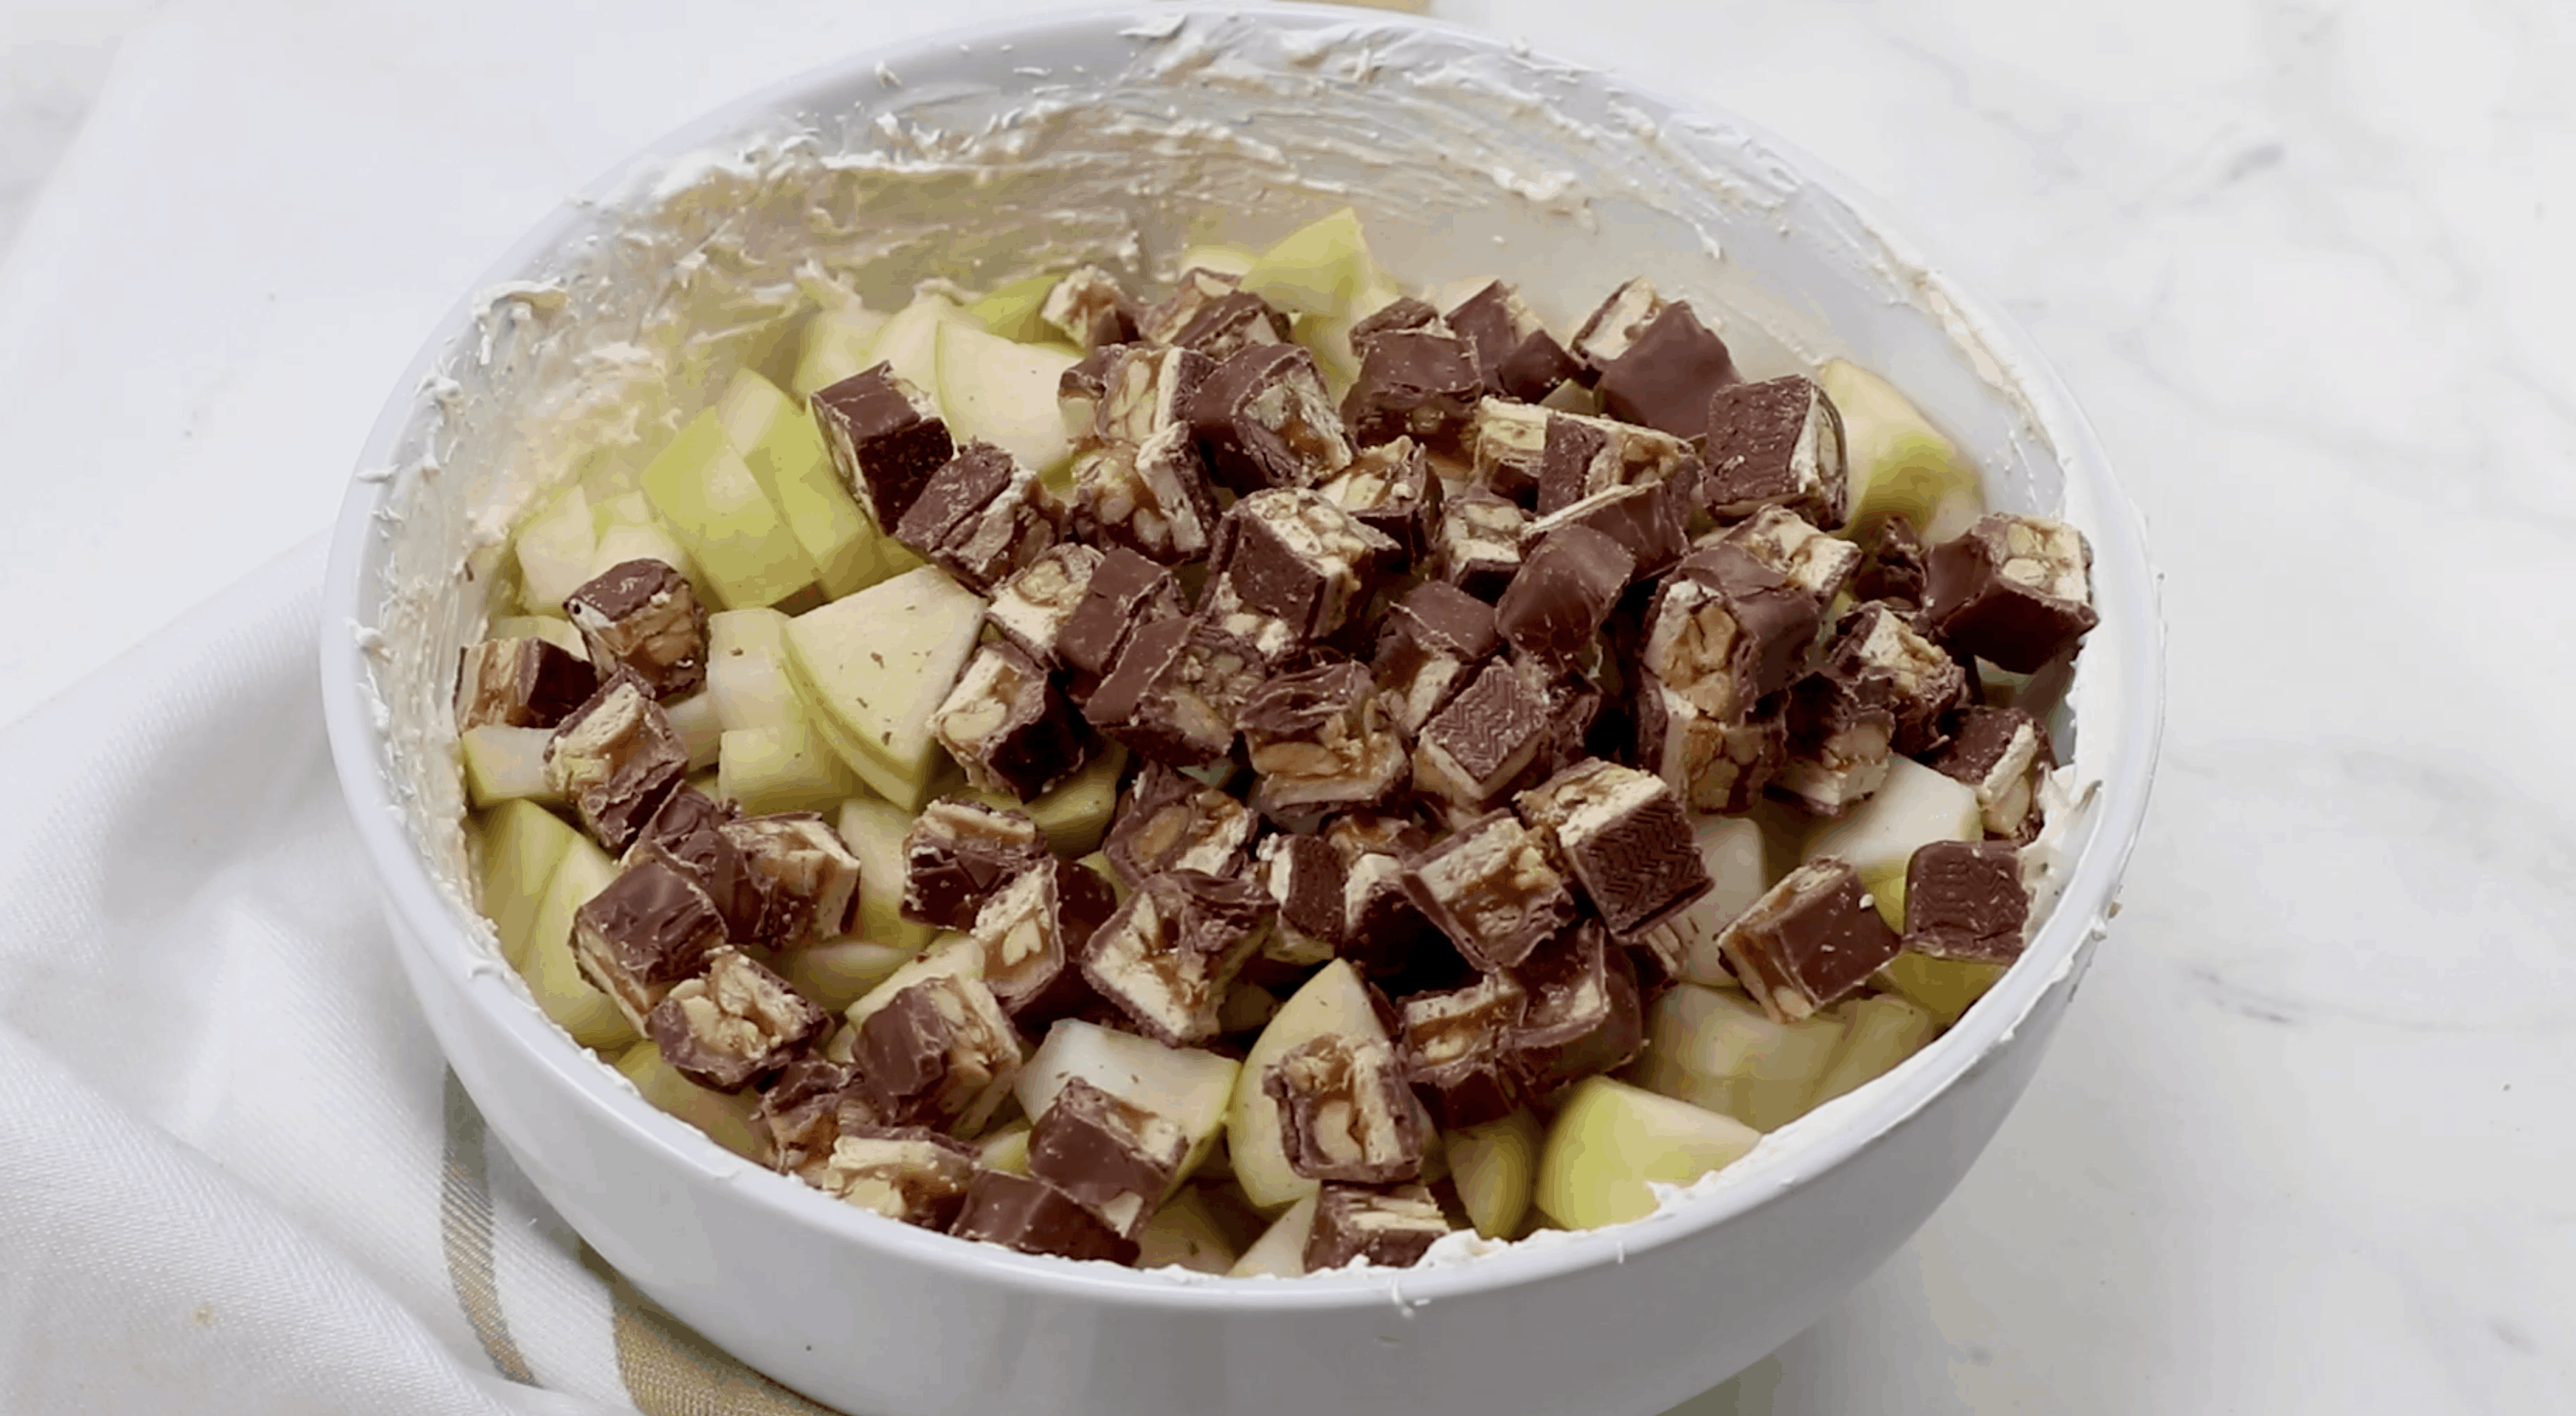 chopped apples and chopped snickers bars offed to cool whip mixture in a bowl.